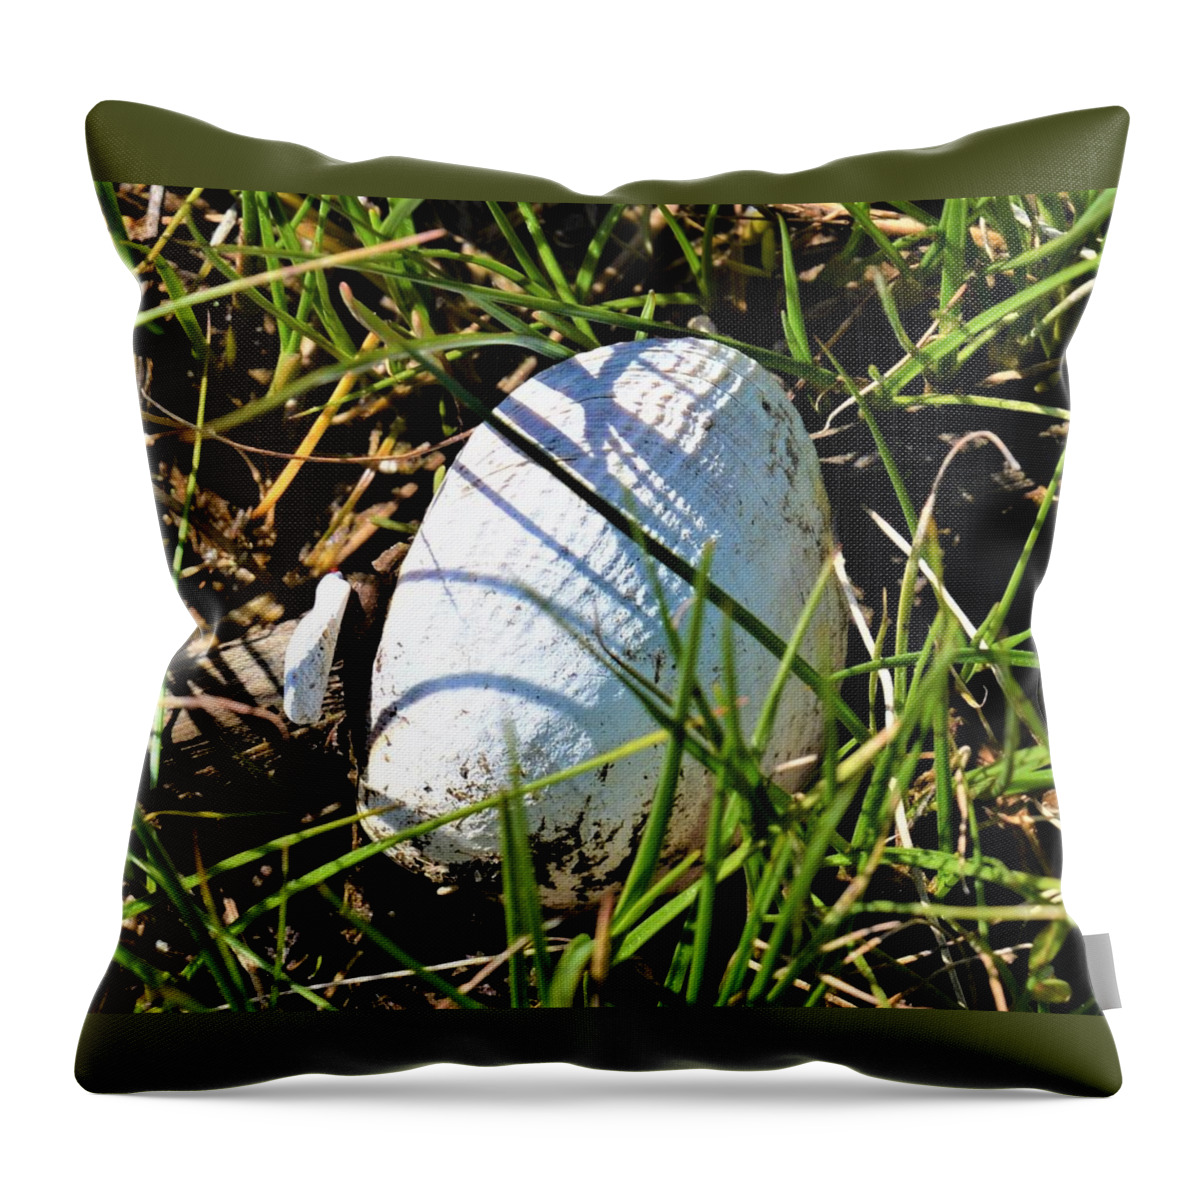 Seashell Throw Pillow featuring the photograph Misplaced Seashell by James Cousineau